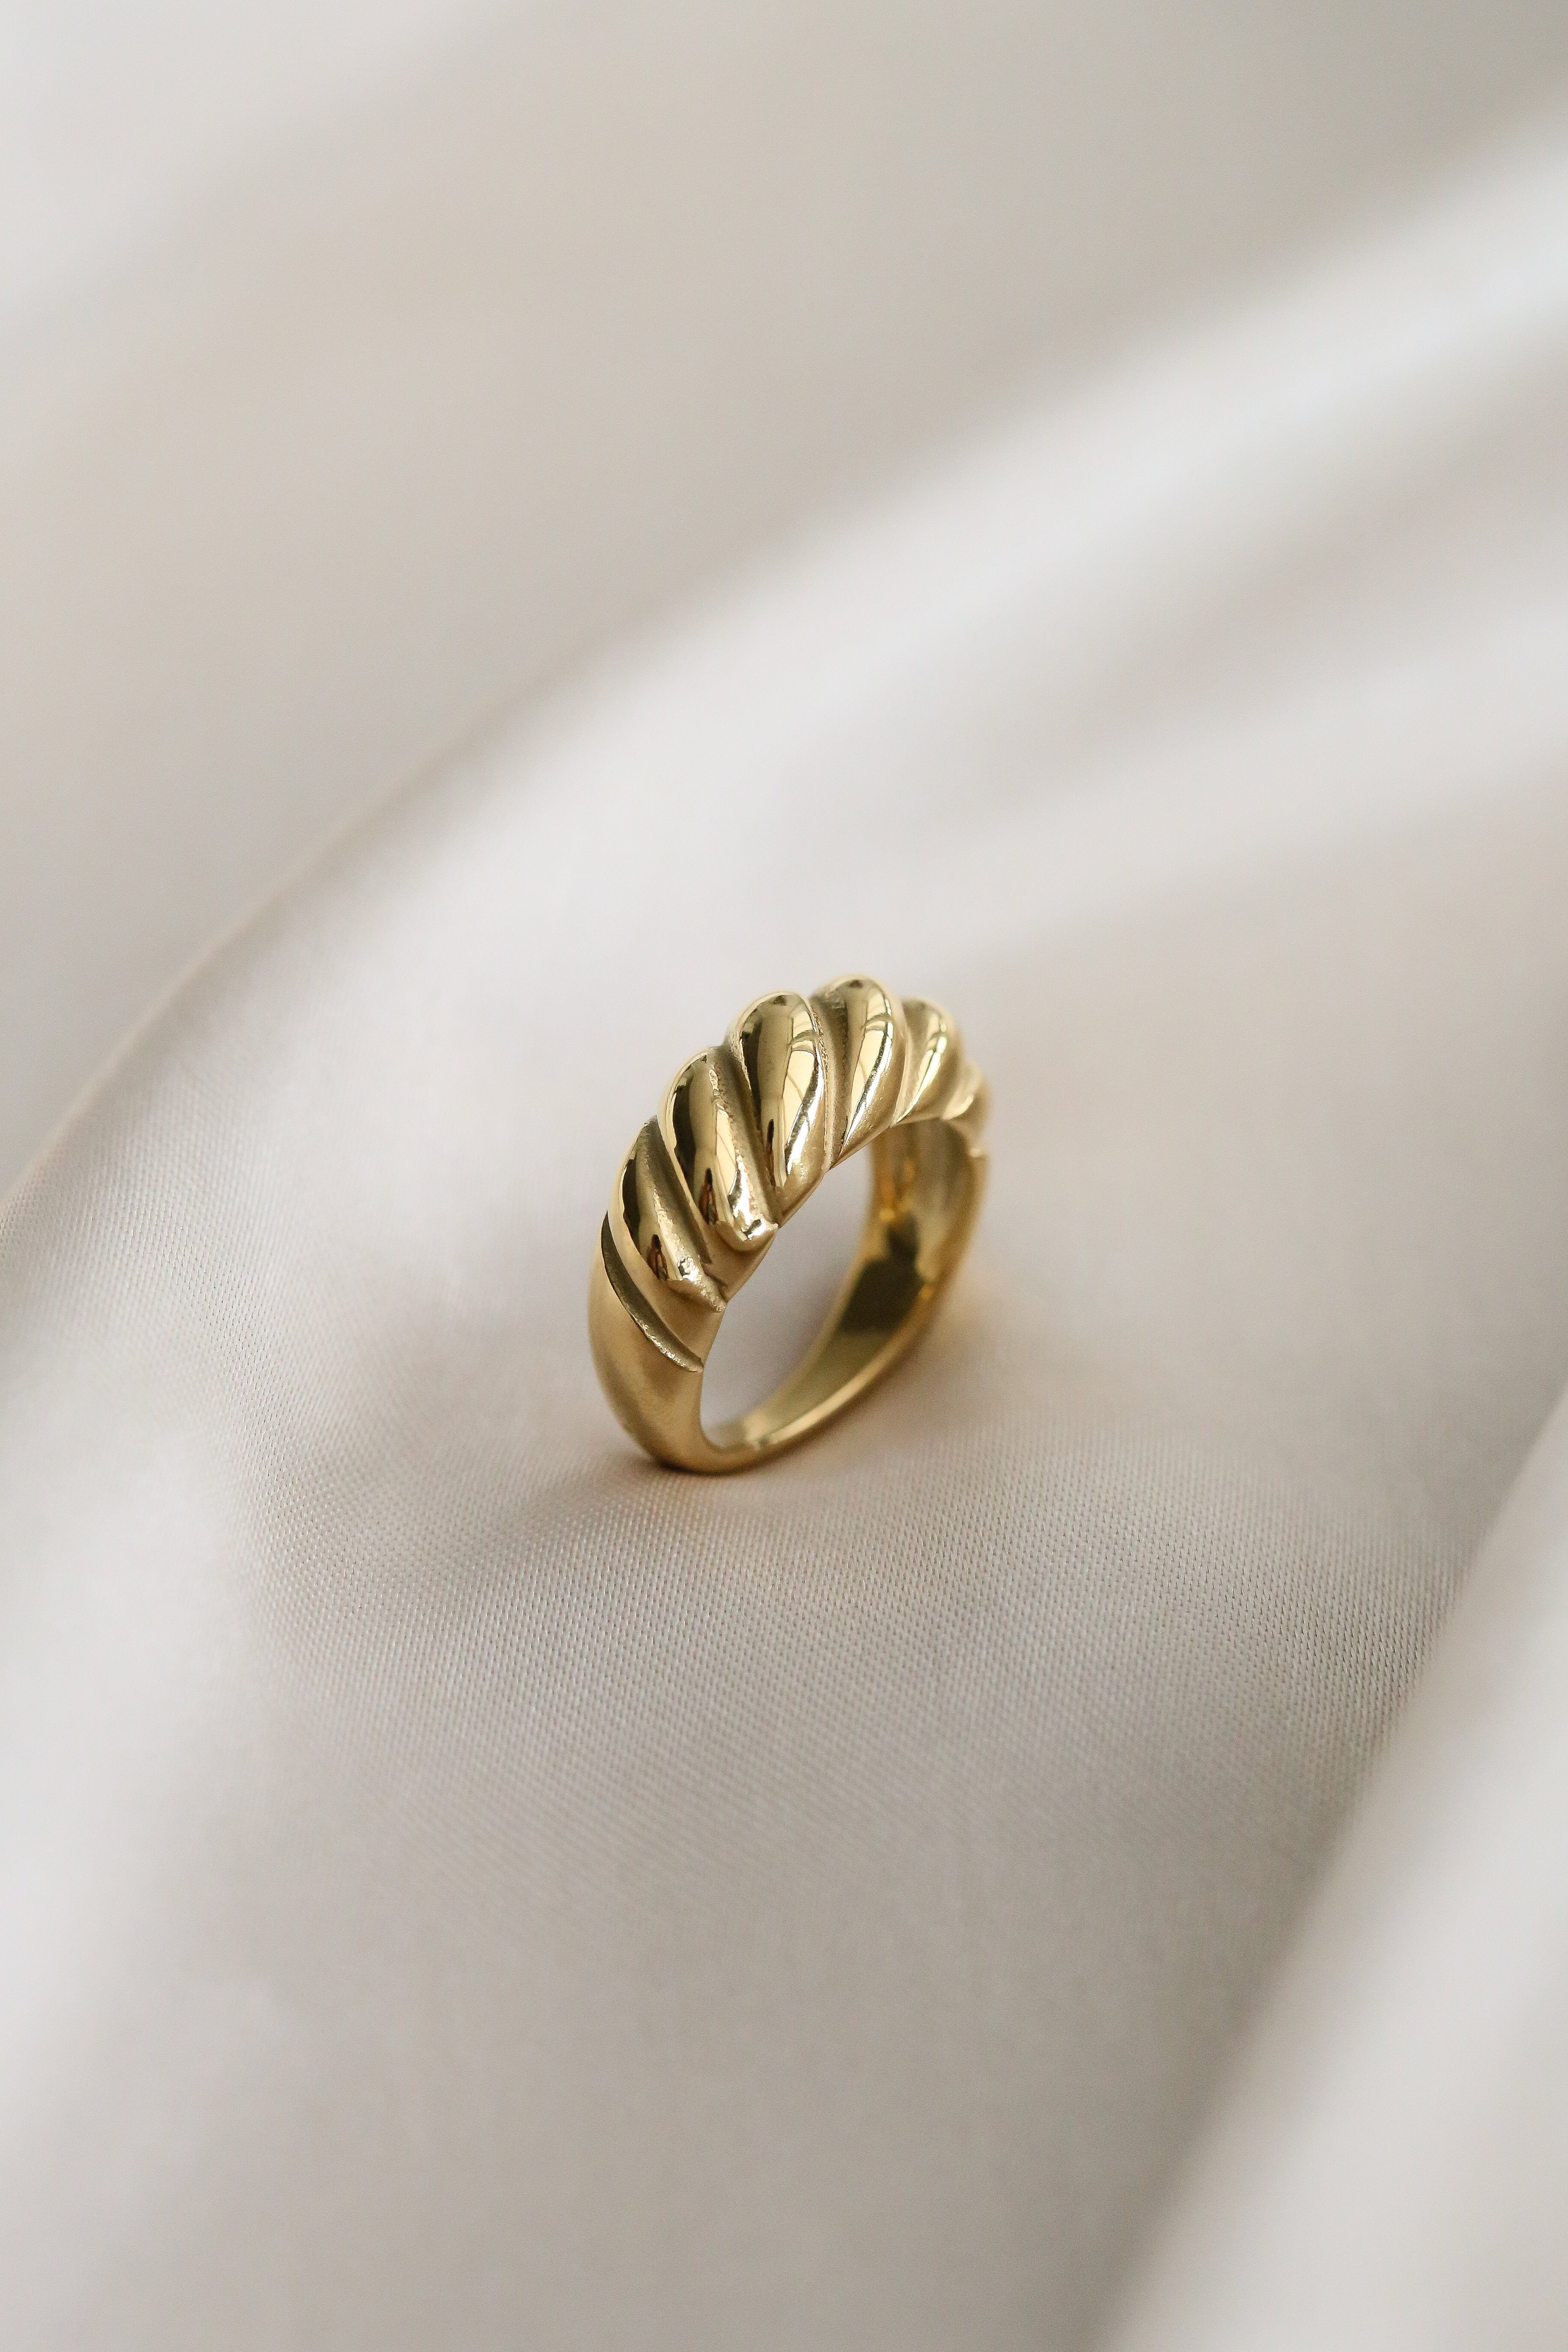 Angelica Ring - Boutique Minimaliste has waterproof, durable, elegant and vintage inspired jewelry